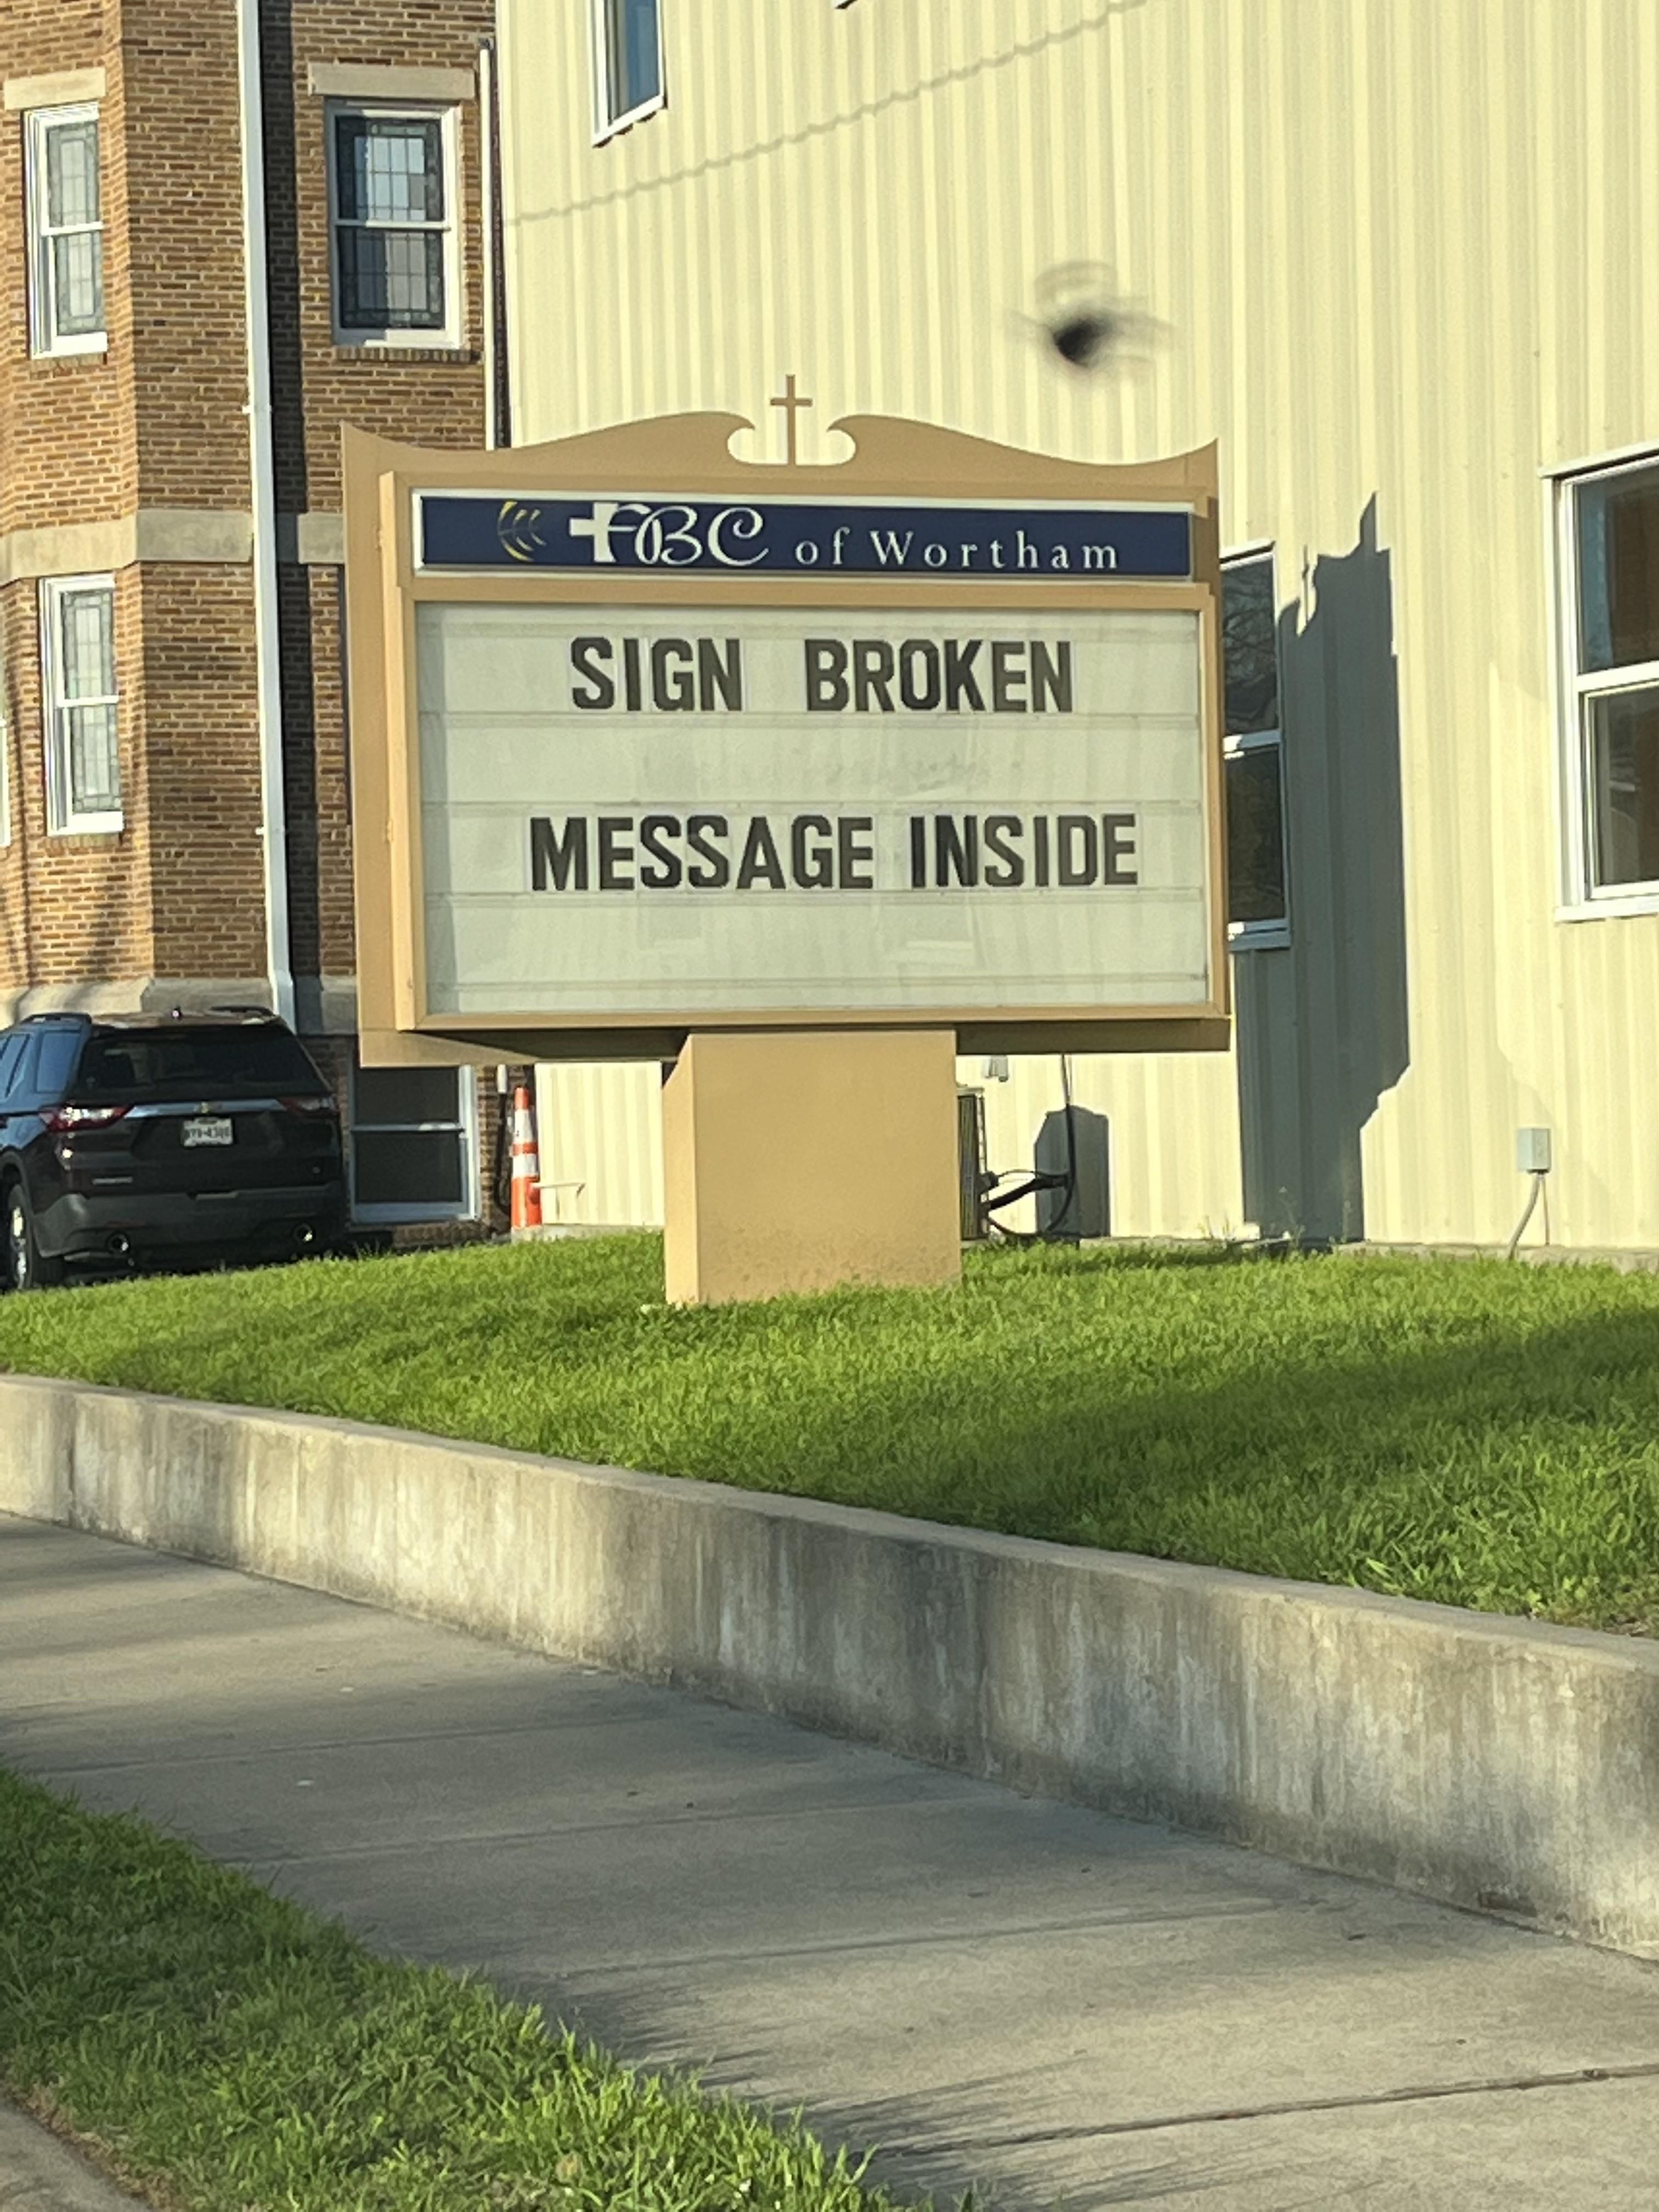 I passed by this sign on a road trip, and I immediately had to stop to make a U-turn and take a photo of it!